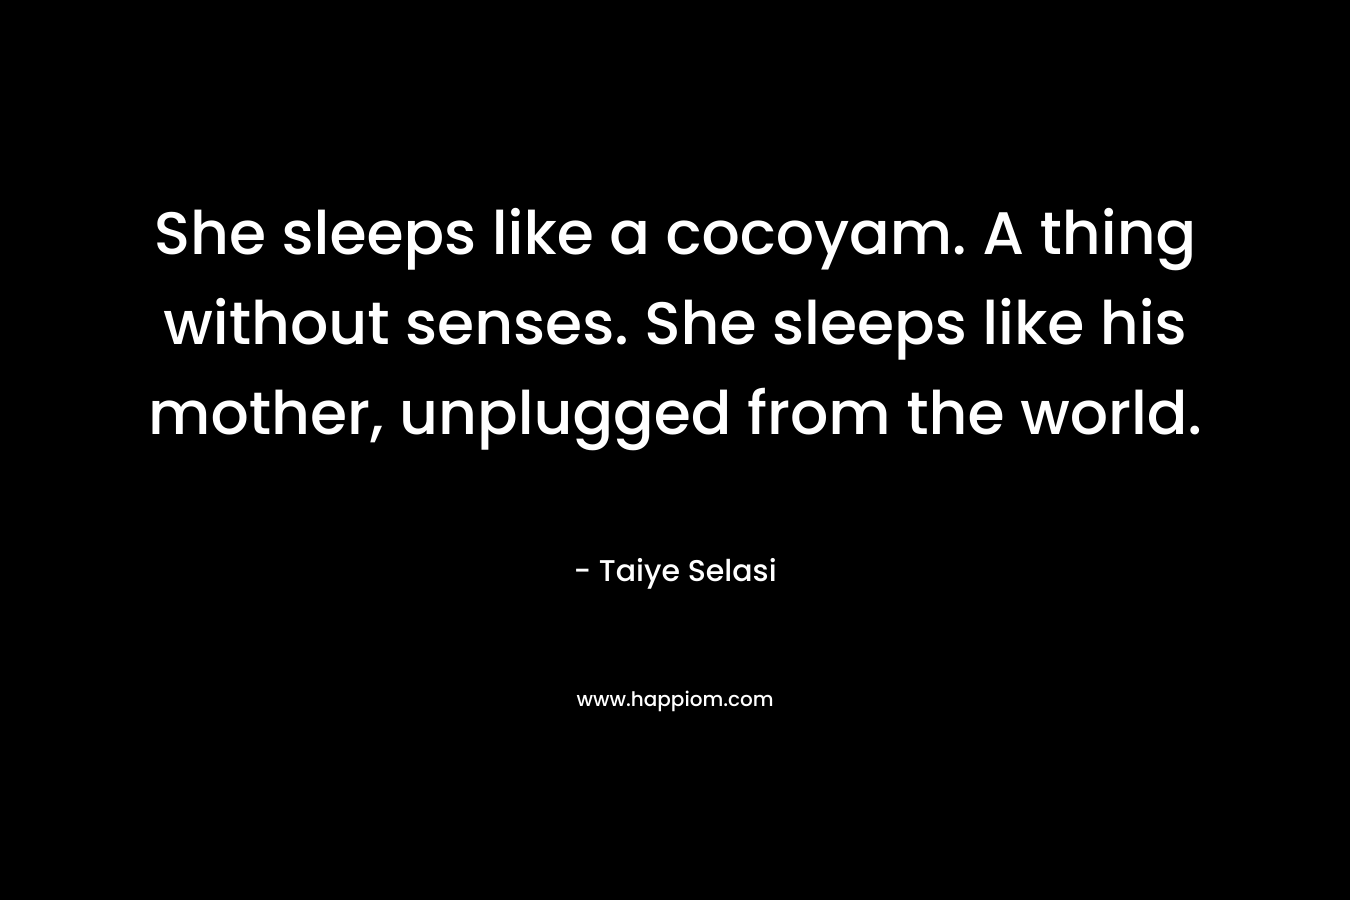 She sleeps like a cocoyam. A thing without senses. She sleeps like his mother, unplugged from the world. – Taiye Selasi